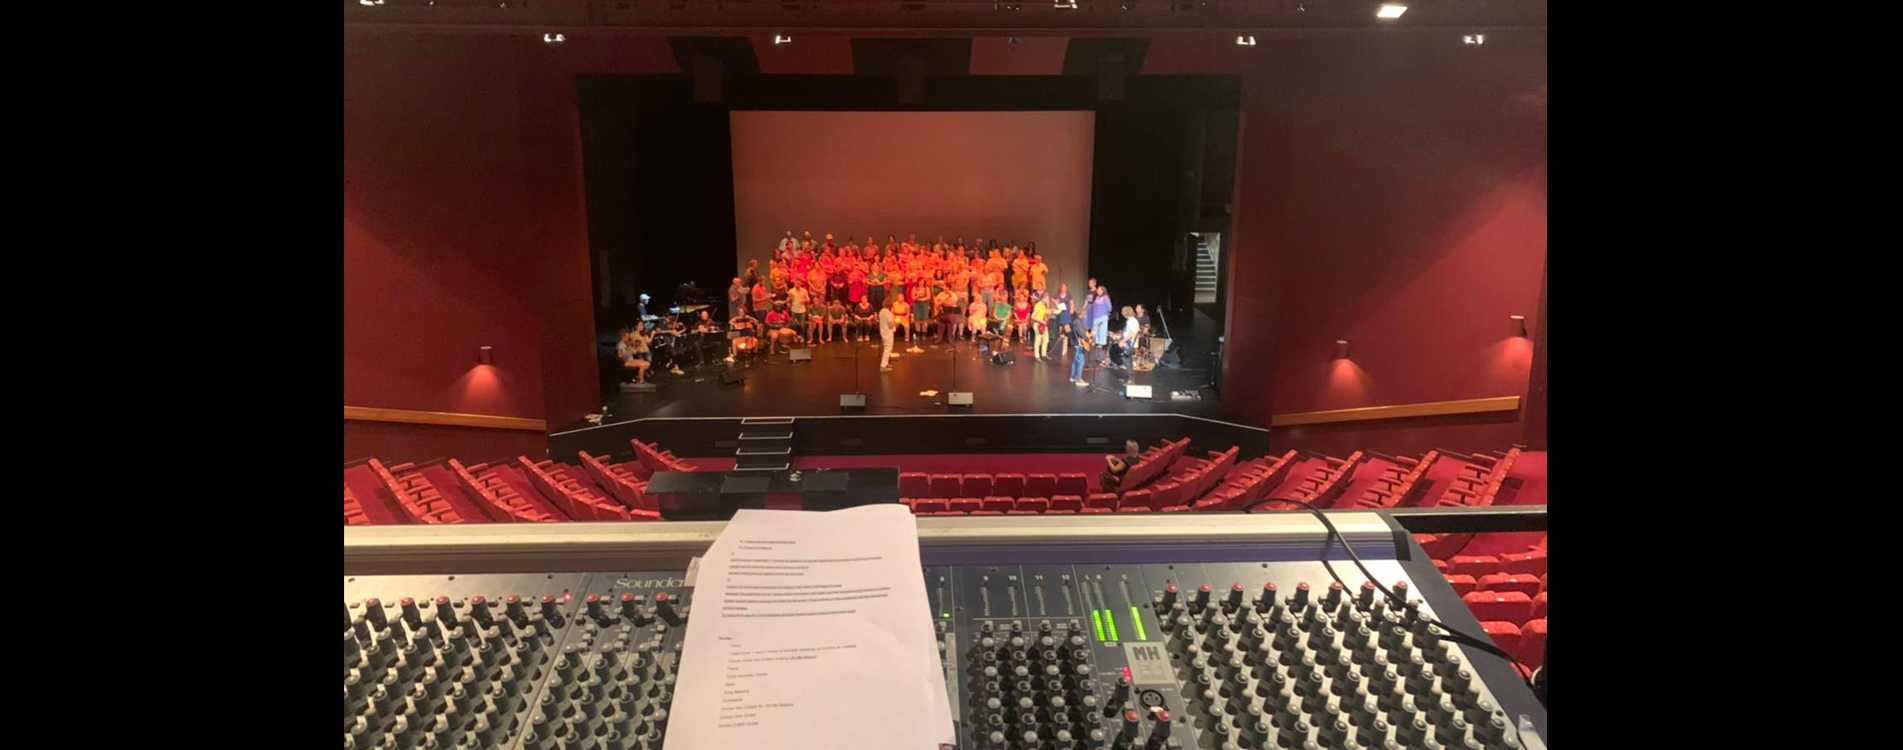 Live Mixing Alice Sings Community Choir Left Of Elephant Sound